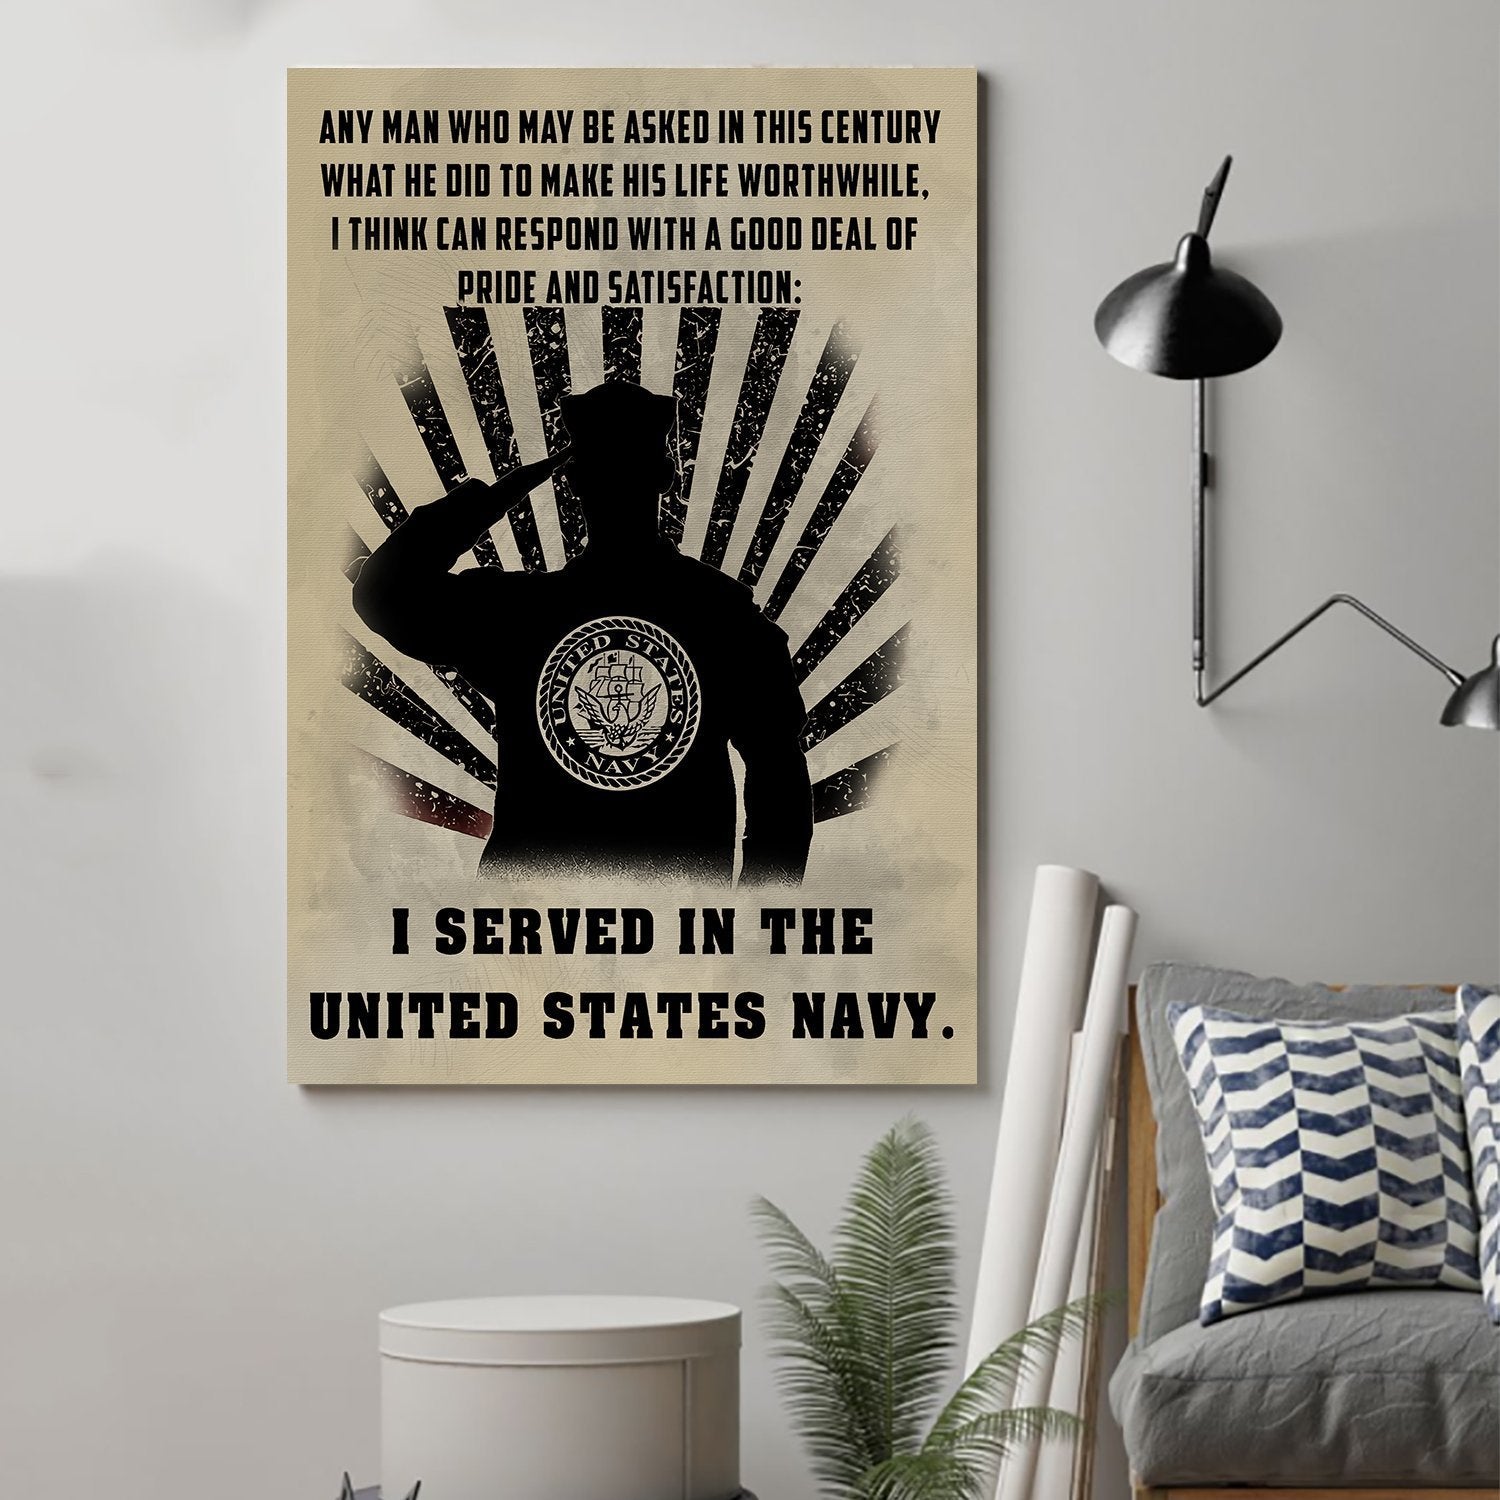 soldier Canvas and Poster ��� any man wall decor visual art - GIFTCUSTOM